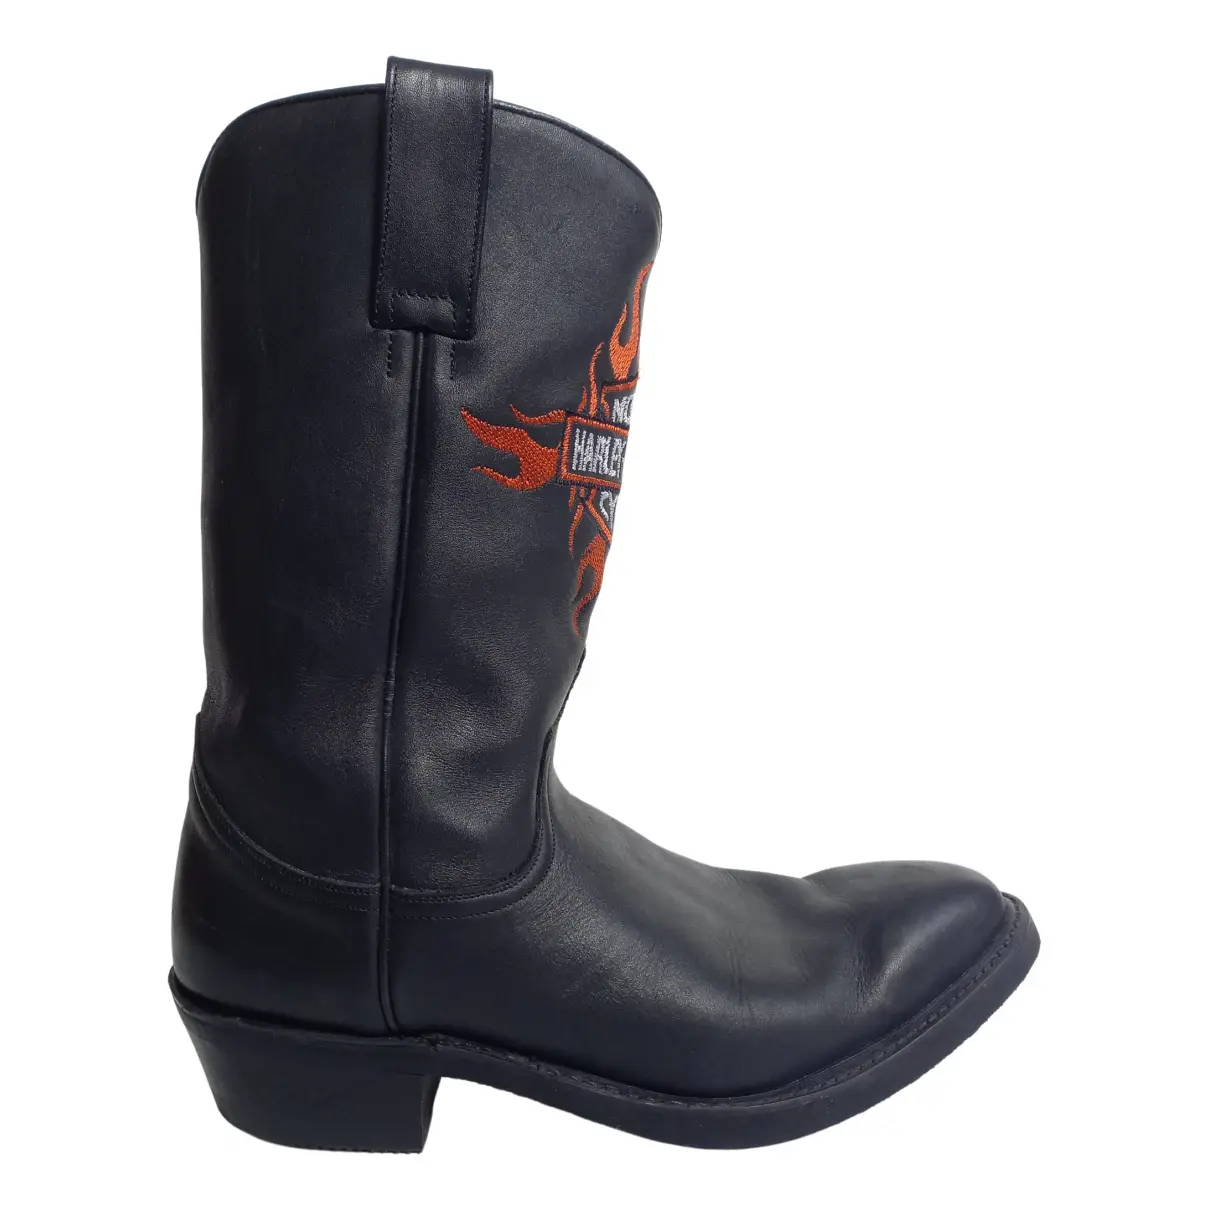 Leather boots HARLEY DAVIDSON